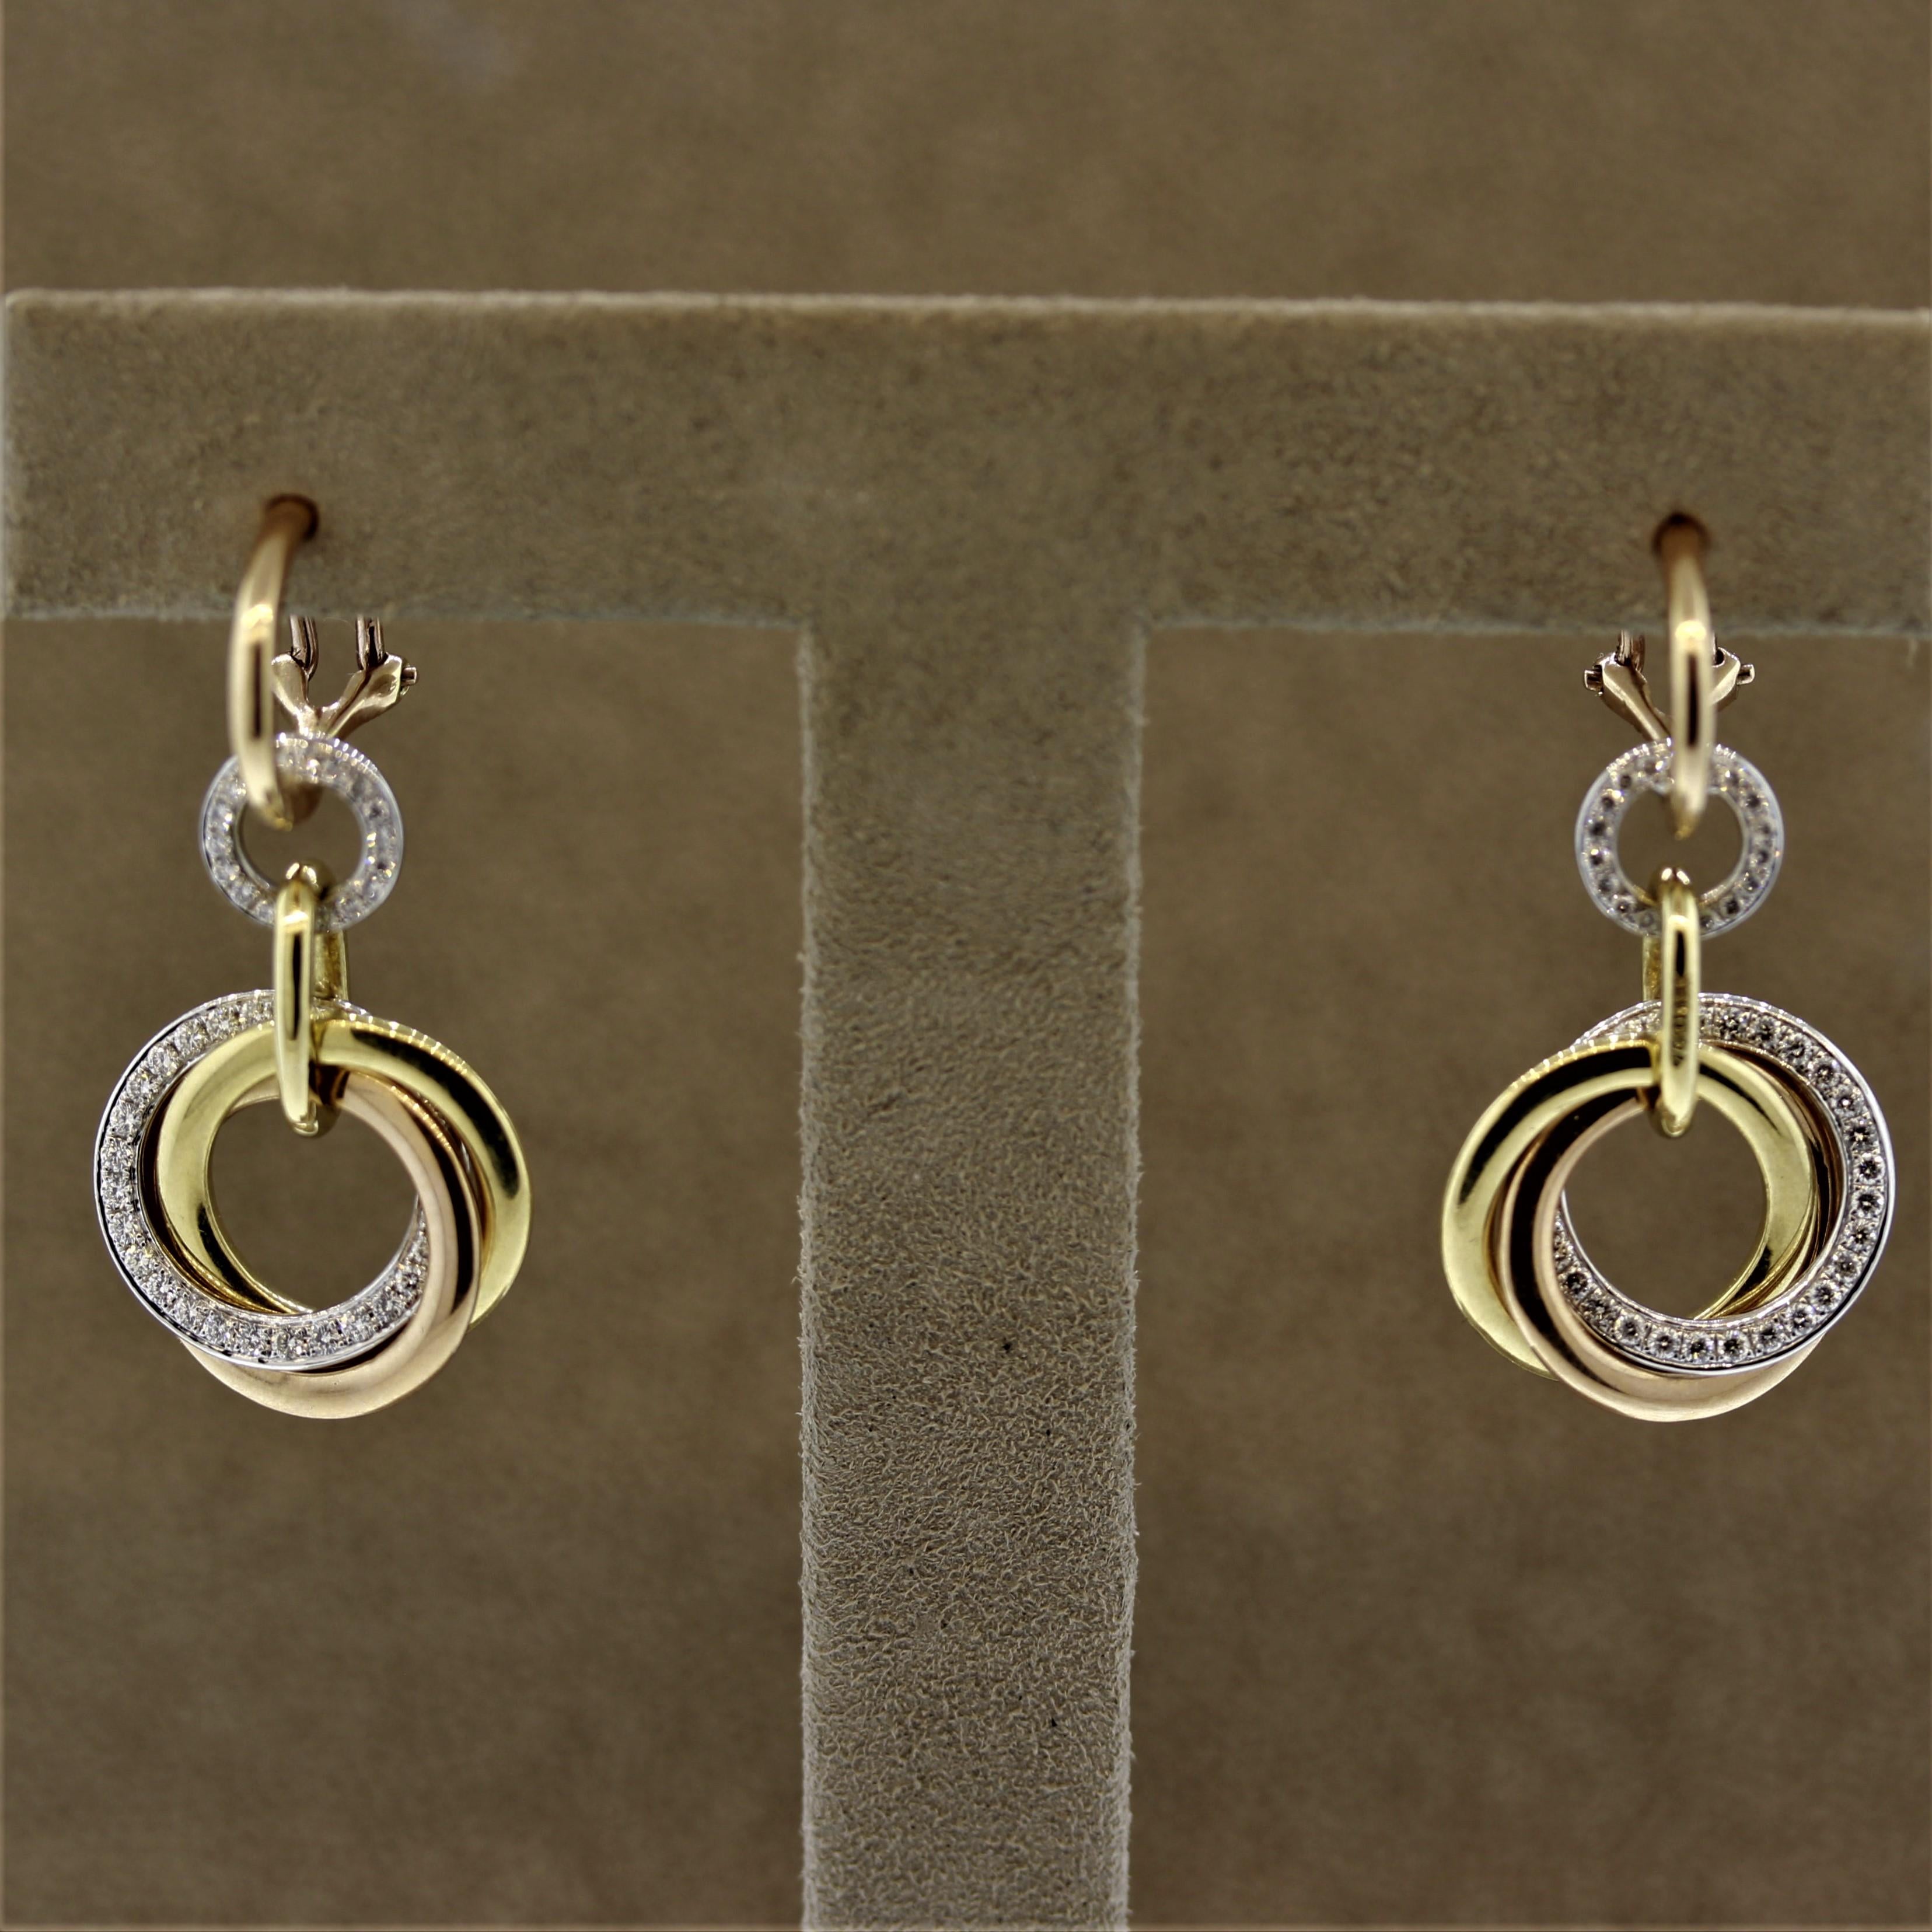 A unique and stylish pair of earrings. Made in 18k gold, they feature 3 independent gold hoops of white, yellow, and rose gold which are interlocked with each other. The white gold hoops are set with round brilliant cut diamonds, totaling 0.64